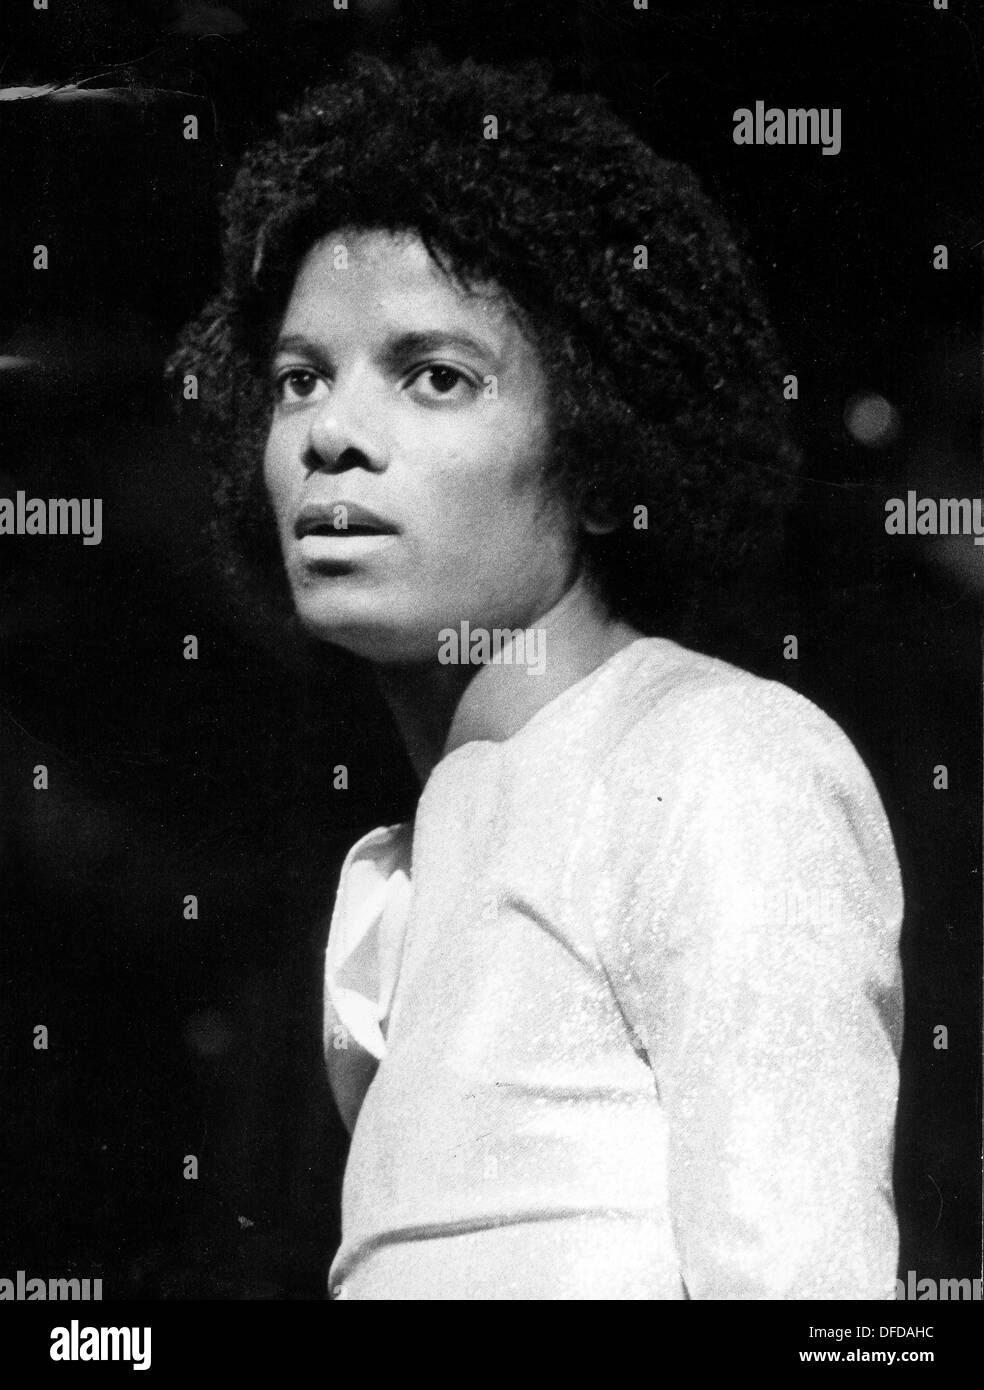 Los Angeles, California, USA. 2nd Oct, 2013. A jury ruled Wednesday in Michael Jackson's family's wrongful death suit against AEG Live that the concert promoter was not responsible for the pop star's death. PICTURED: Feb. 27, 1979 - London, England, United Kingdom - The 'King of Pop,' MICHAEL JACKSON on stage before The Jacksons first concert at The Rainbow Theatre. © KEYSTONE Pictures USA/ZUMAPRESS.com/Alamy Live News Credit:  ZUMA Press, Inc./Alamy Live News Stock Photo